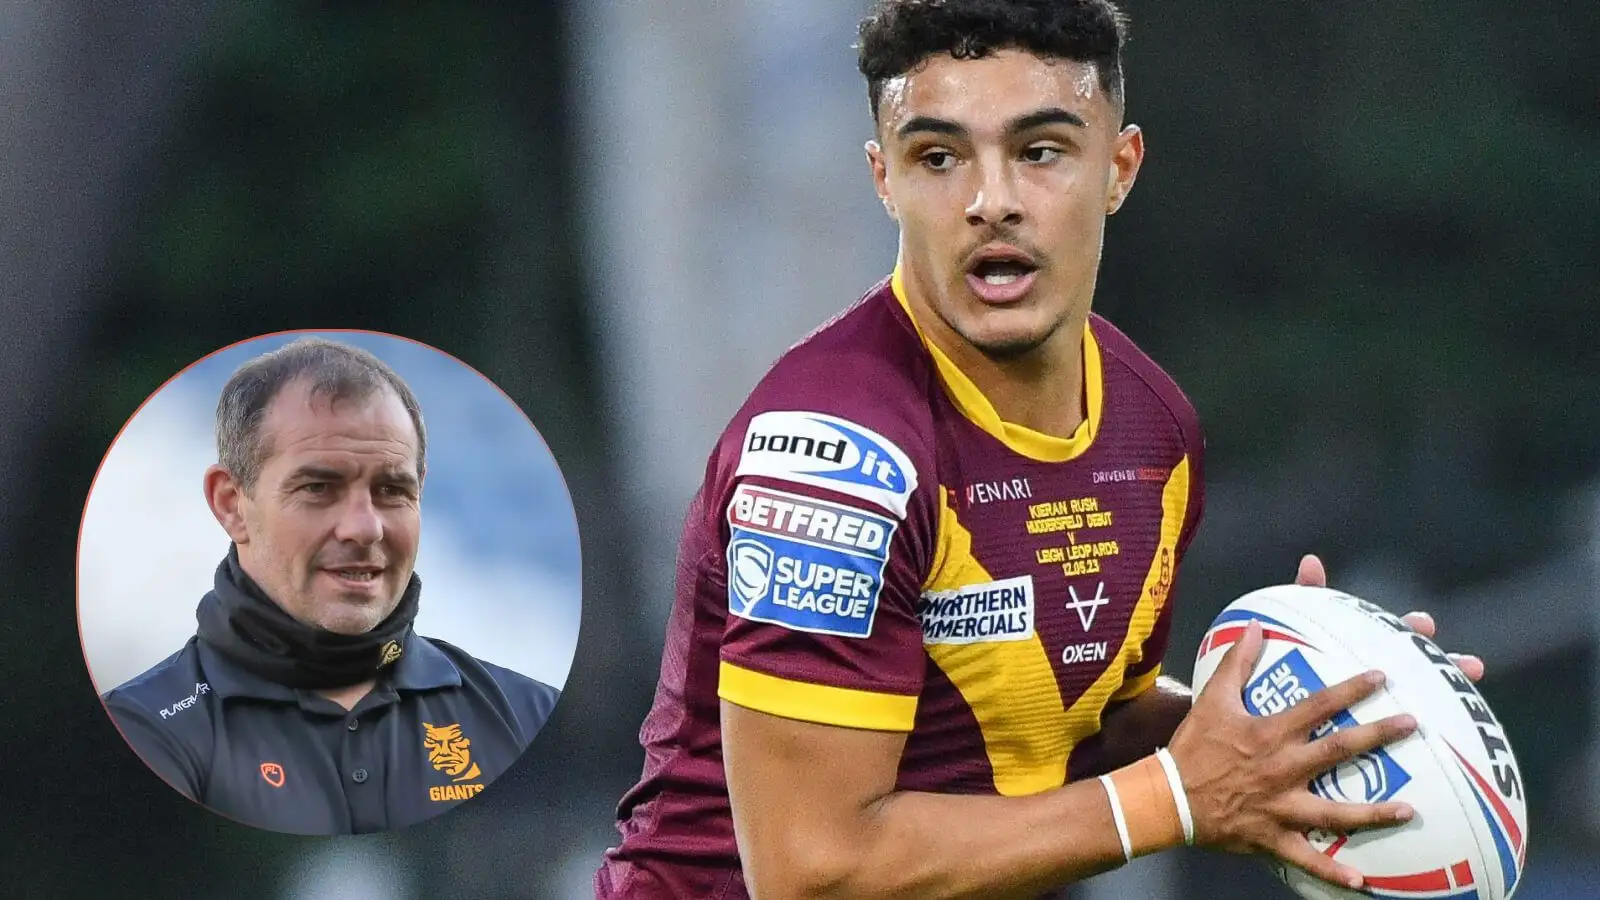 Ian Watson predicts bright future for Huddersfield Giants rising star: ‘His levels in training are through the roof’